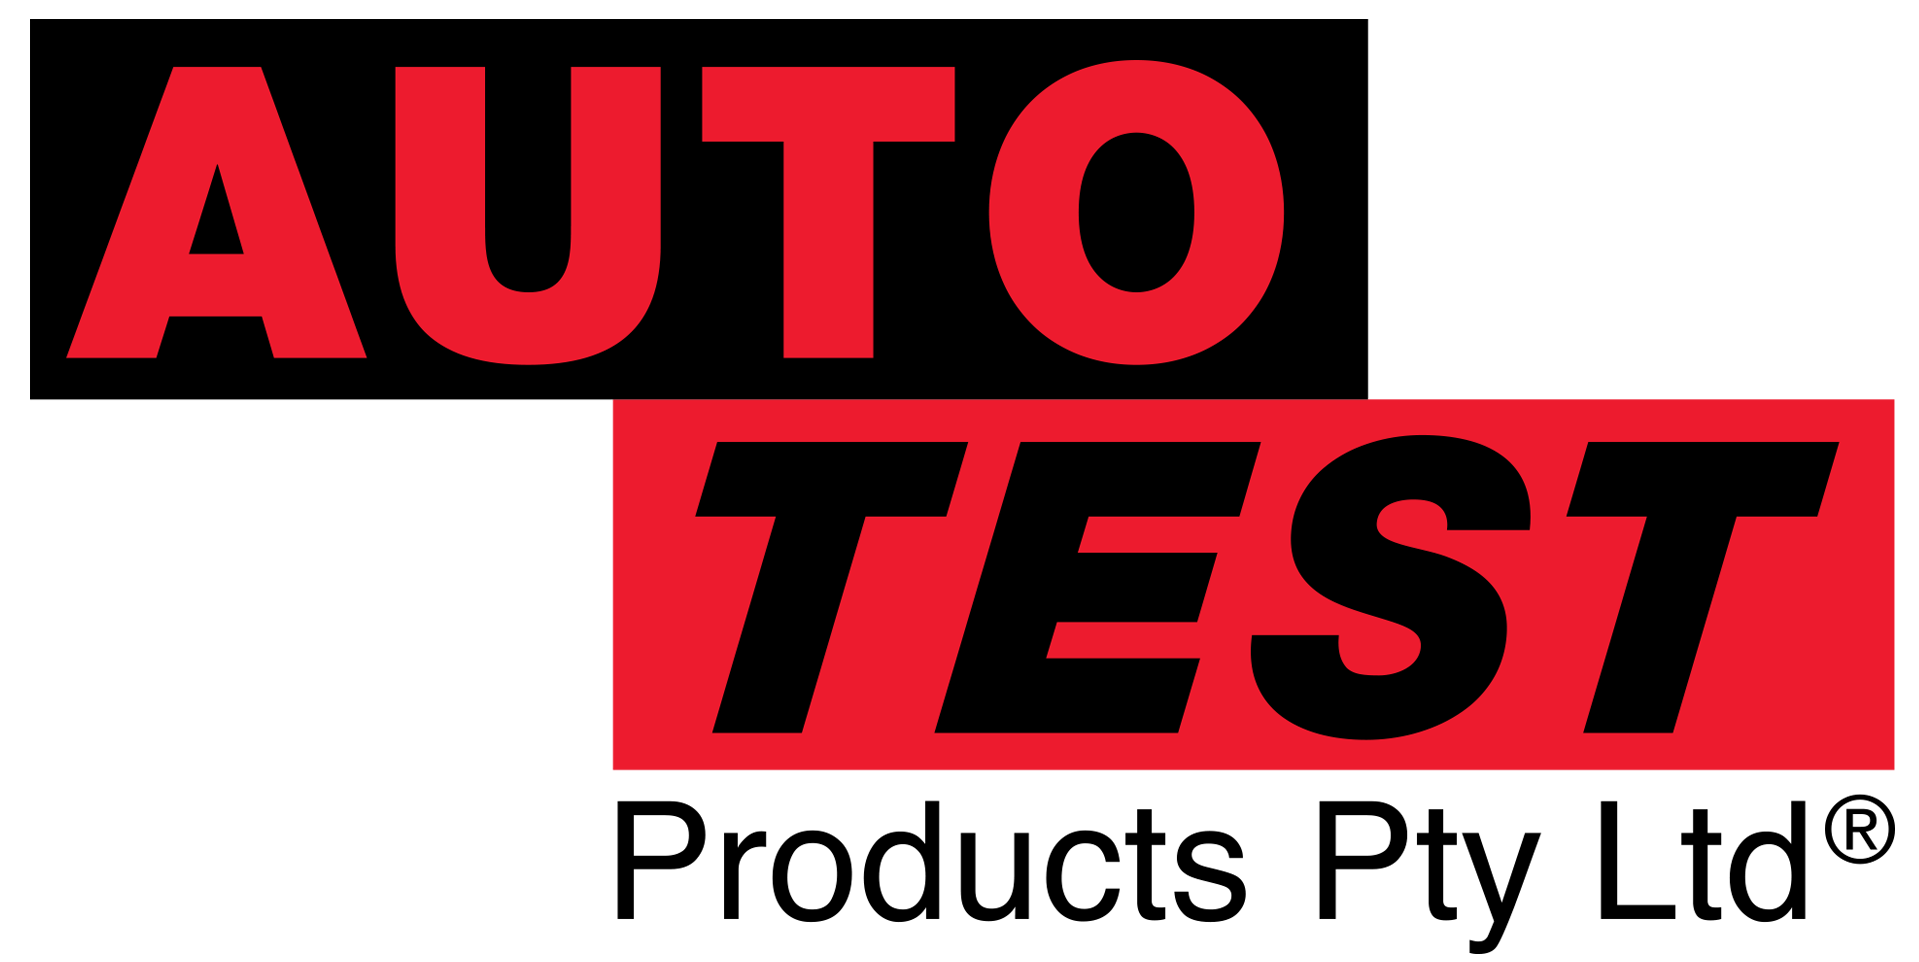 AutoTest Products